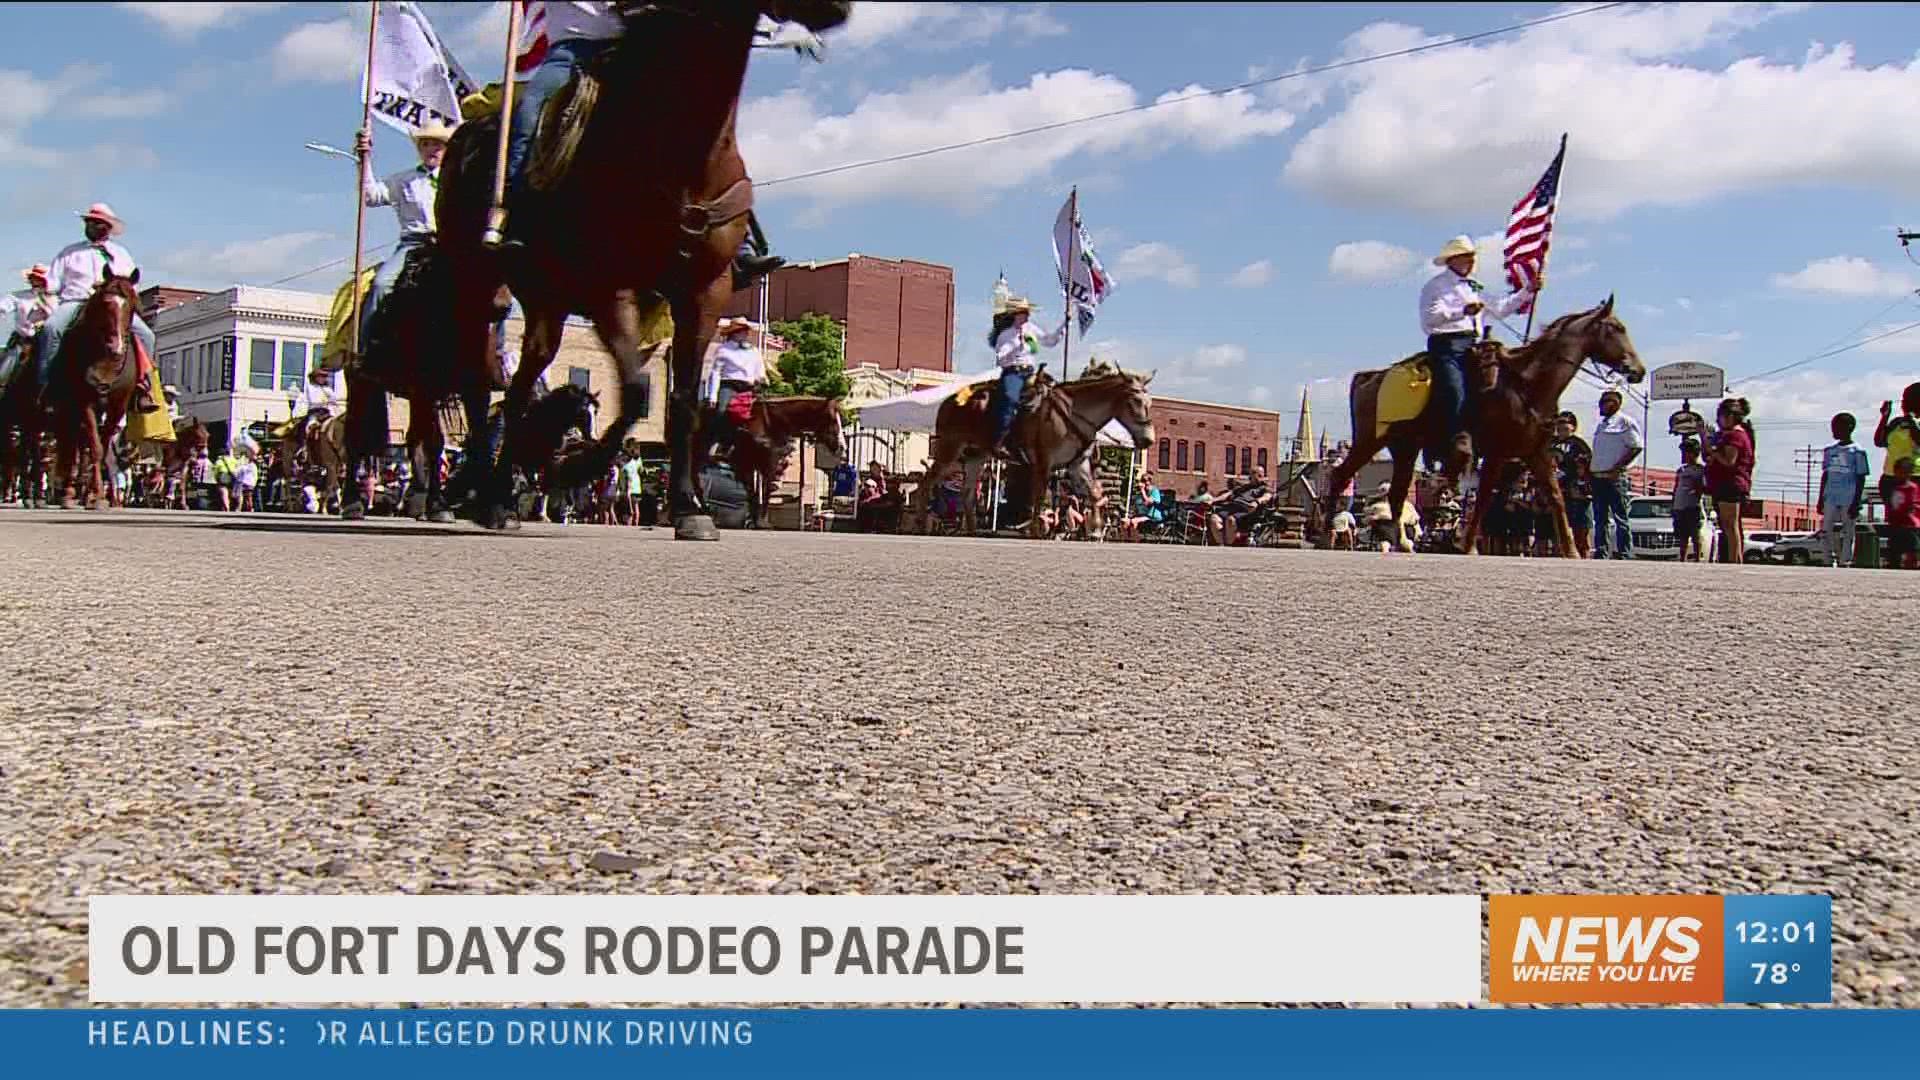 Old Fort Days Rodeo kicked off this week's festivities with its annual parade in downtown Fort Smith.